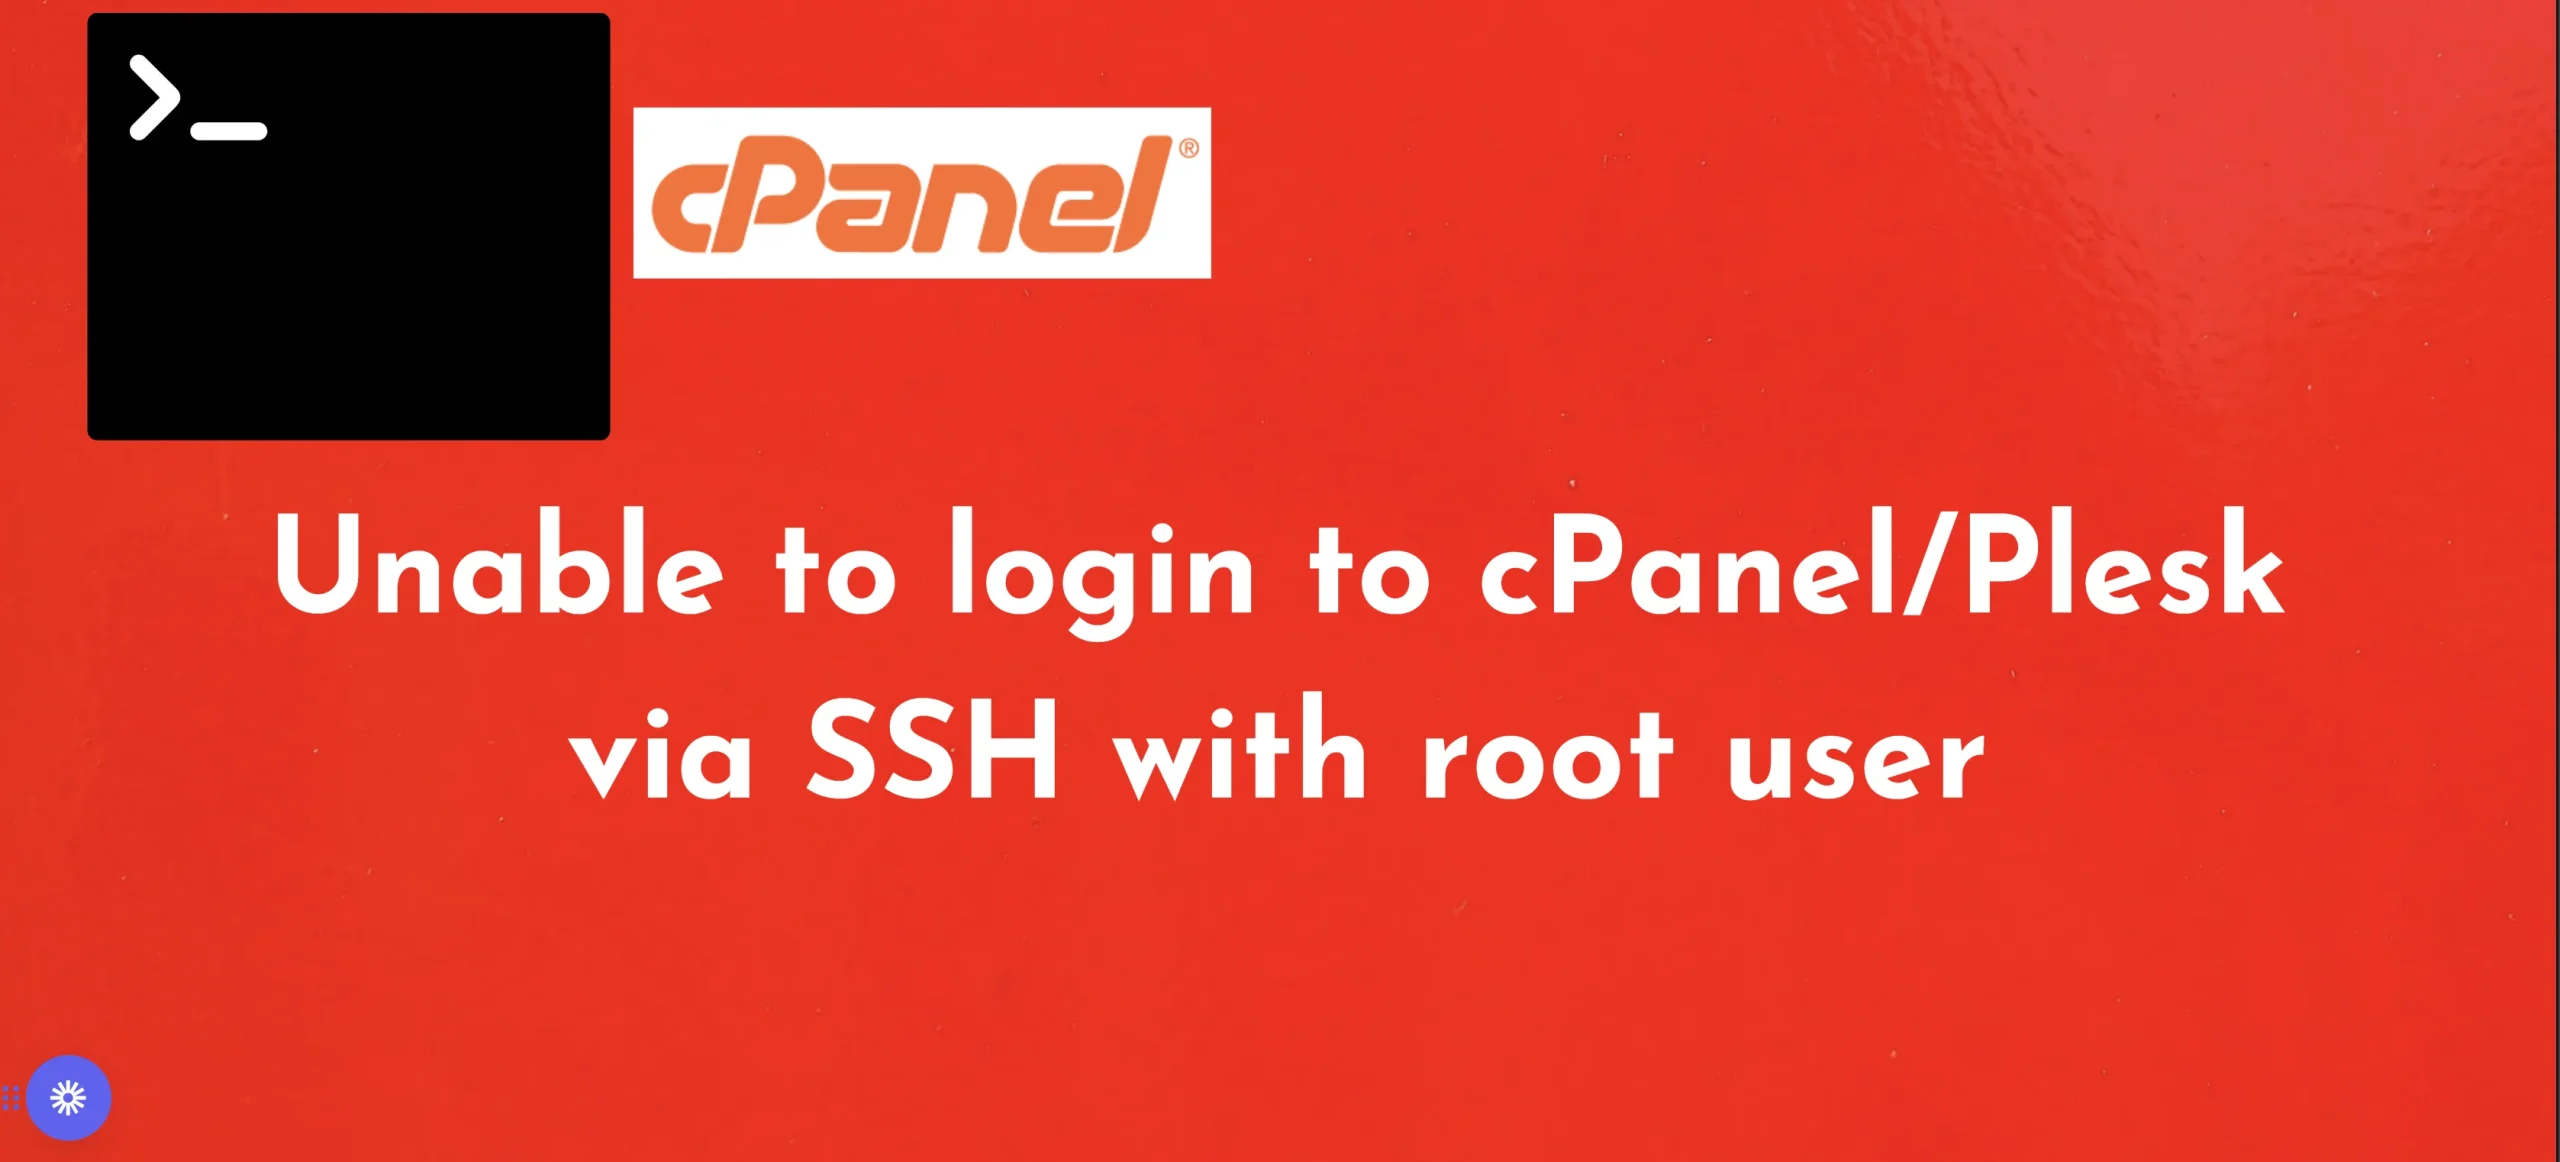 Unable to login to cPanel/Plesk via SSH with root user